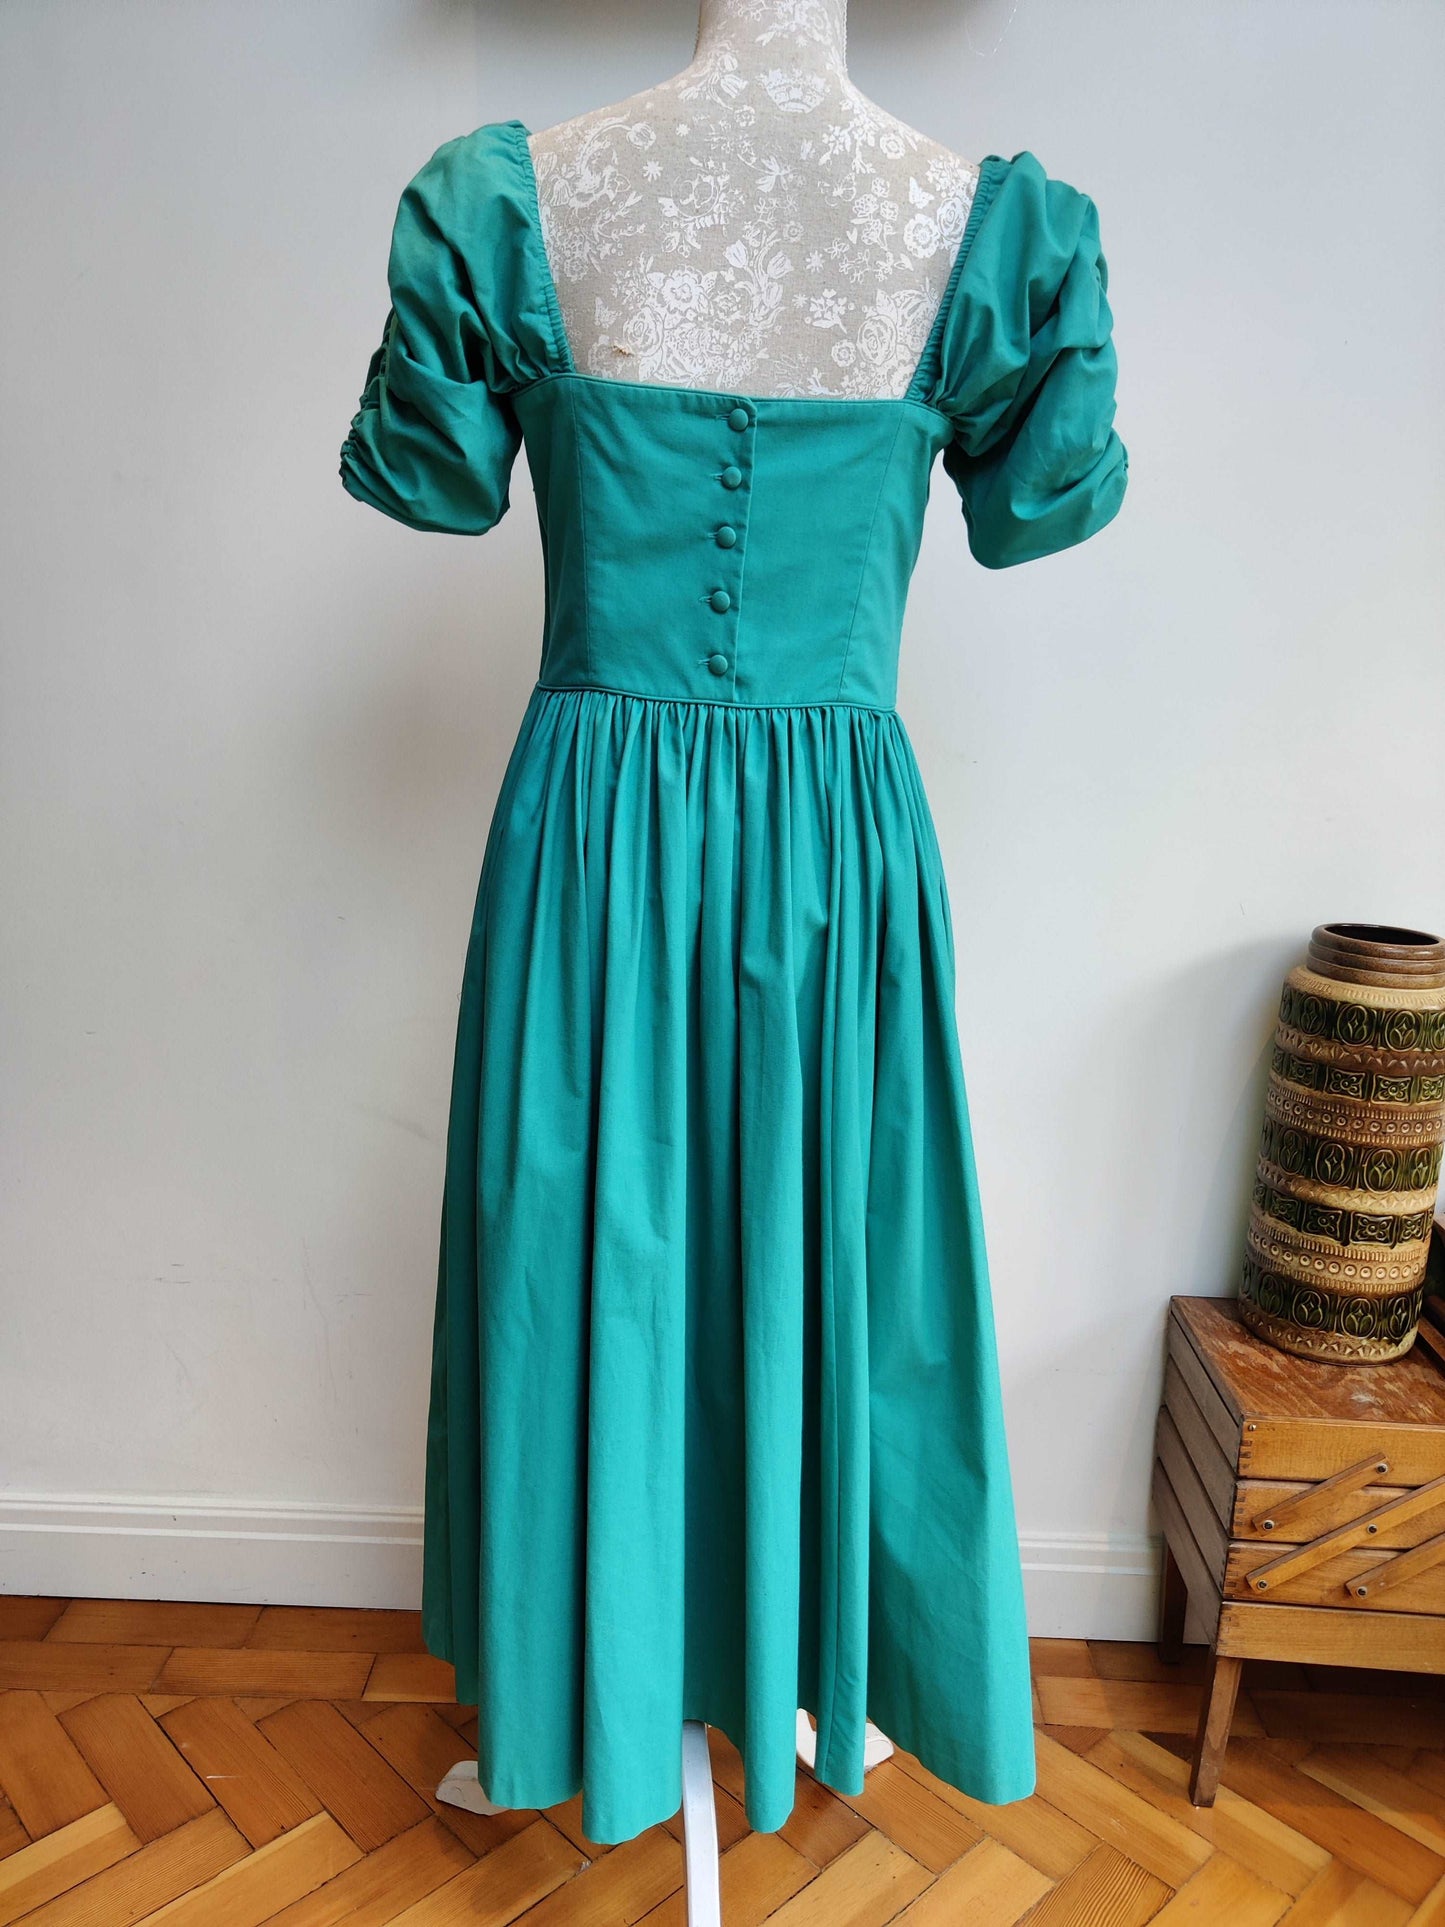 Green Laura Ashley 80s dress with fit and flare style